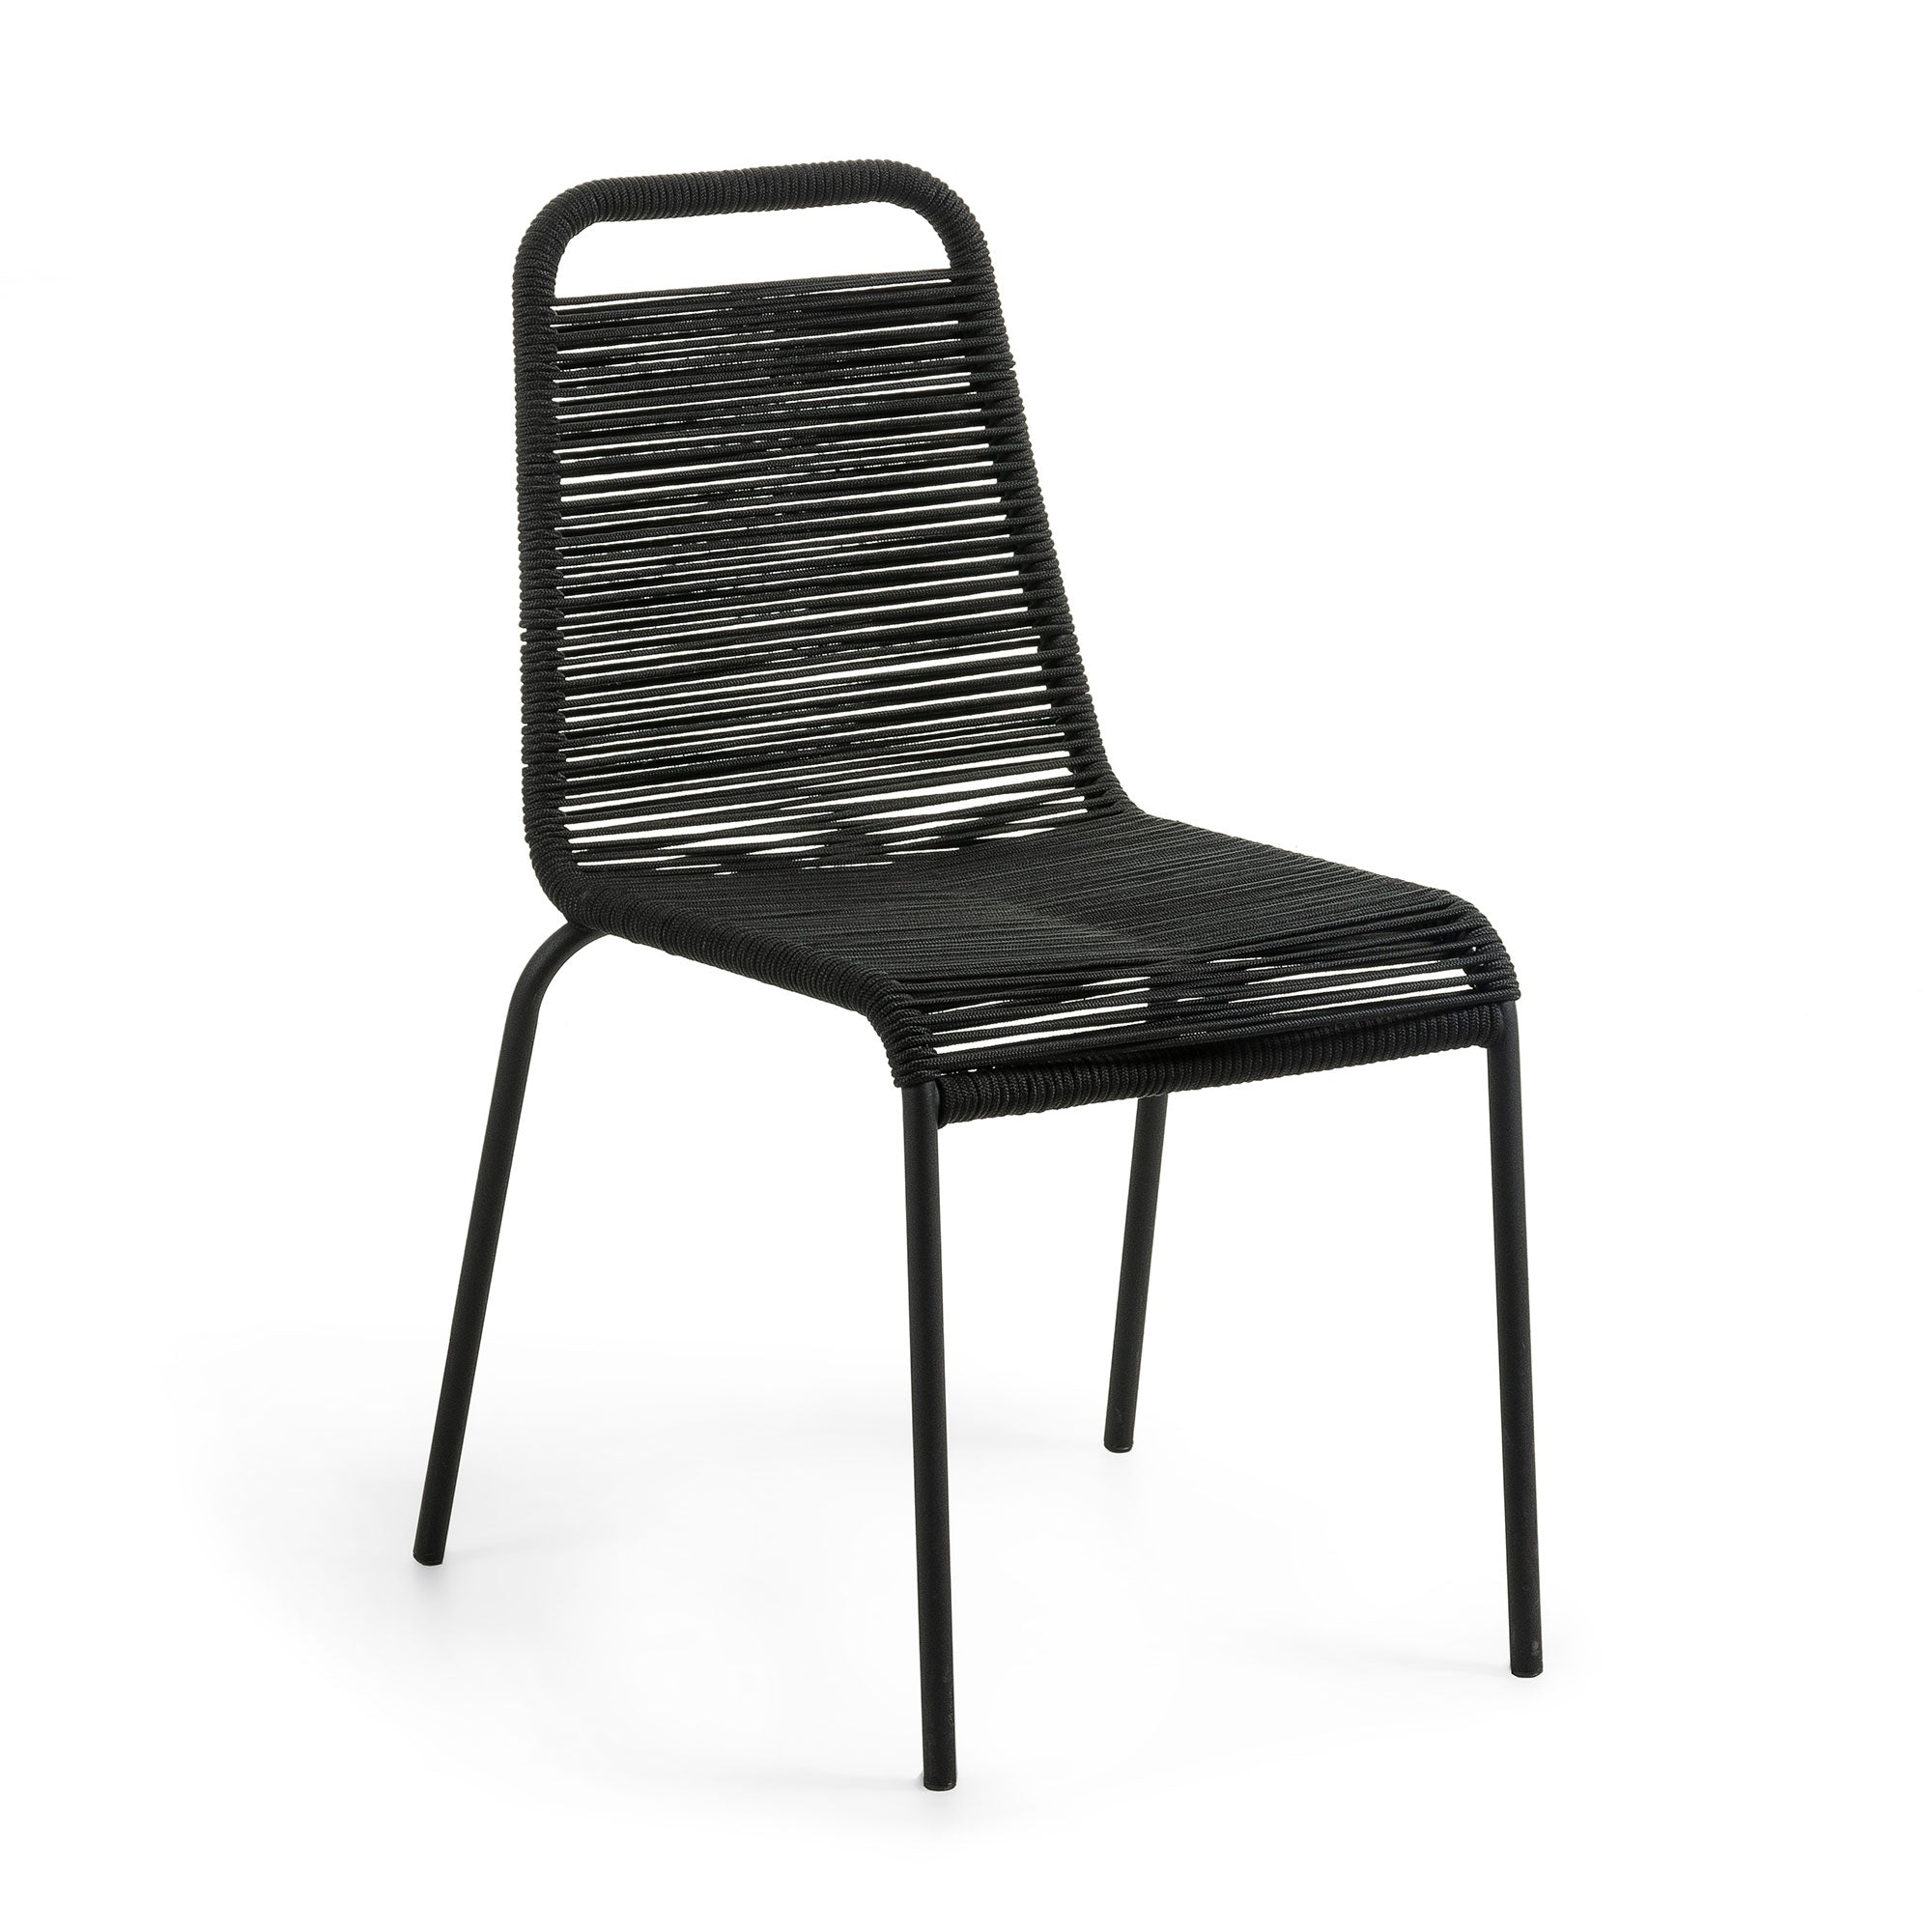 Lambton stackable chair in black rope steel with black finish